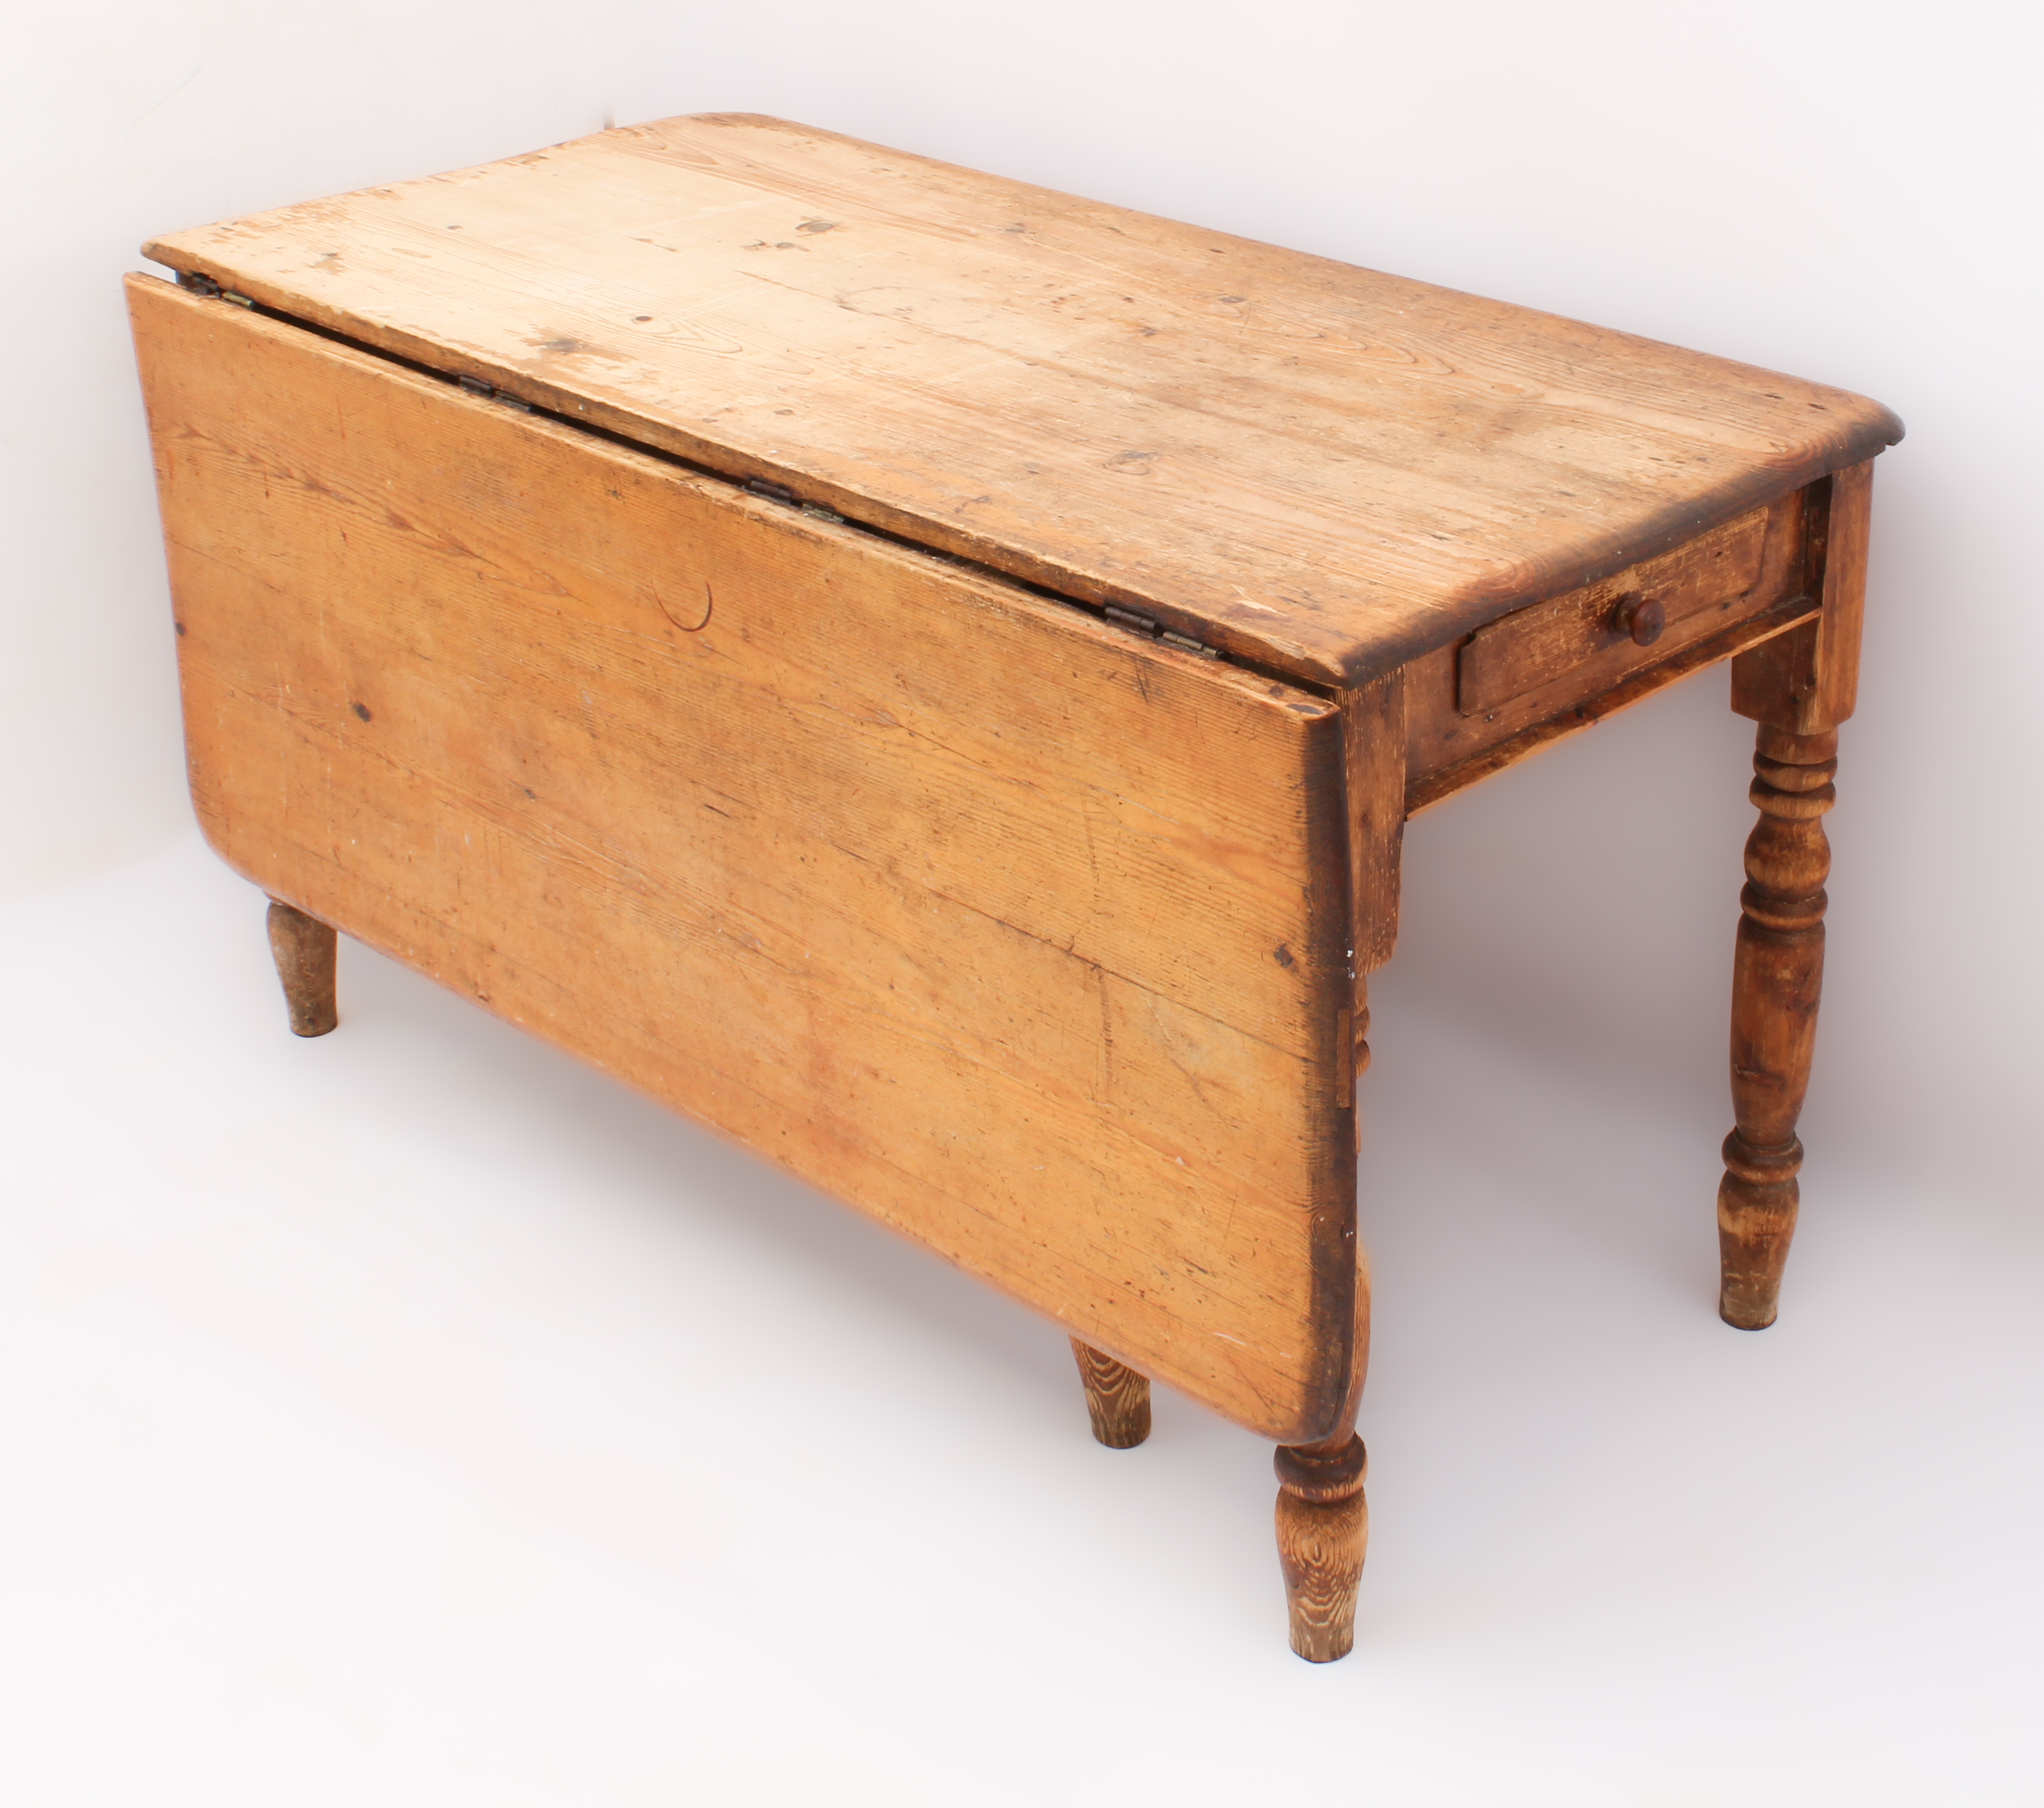 A 19th century pine farmhouse dining table with single dropflap - the rectangular top over two end-